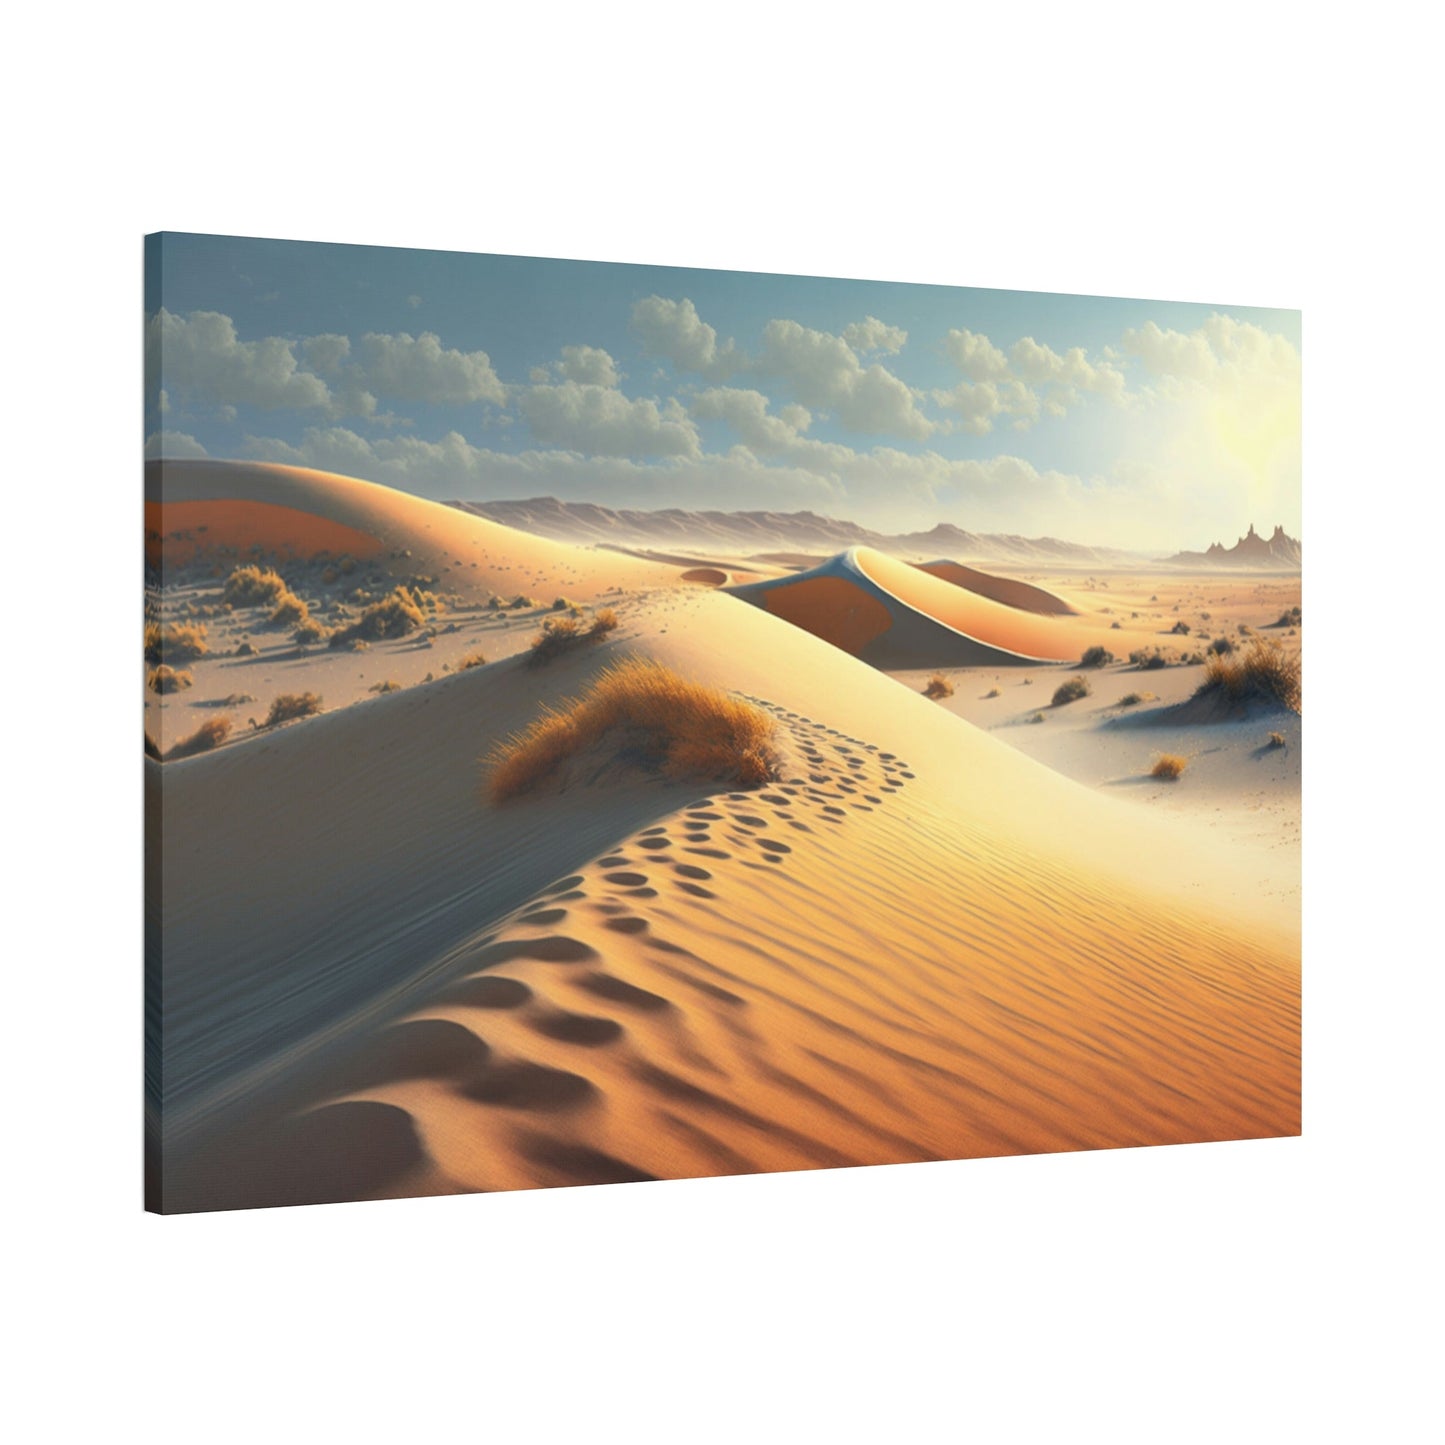 Vast Wonders: Artistic Canvas & Poster Print of the Desert for Your Wall